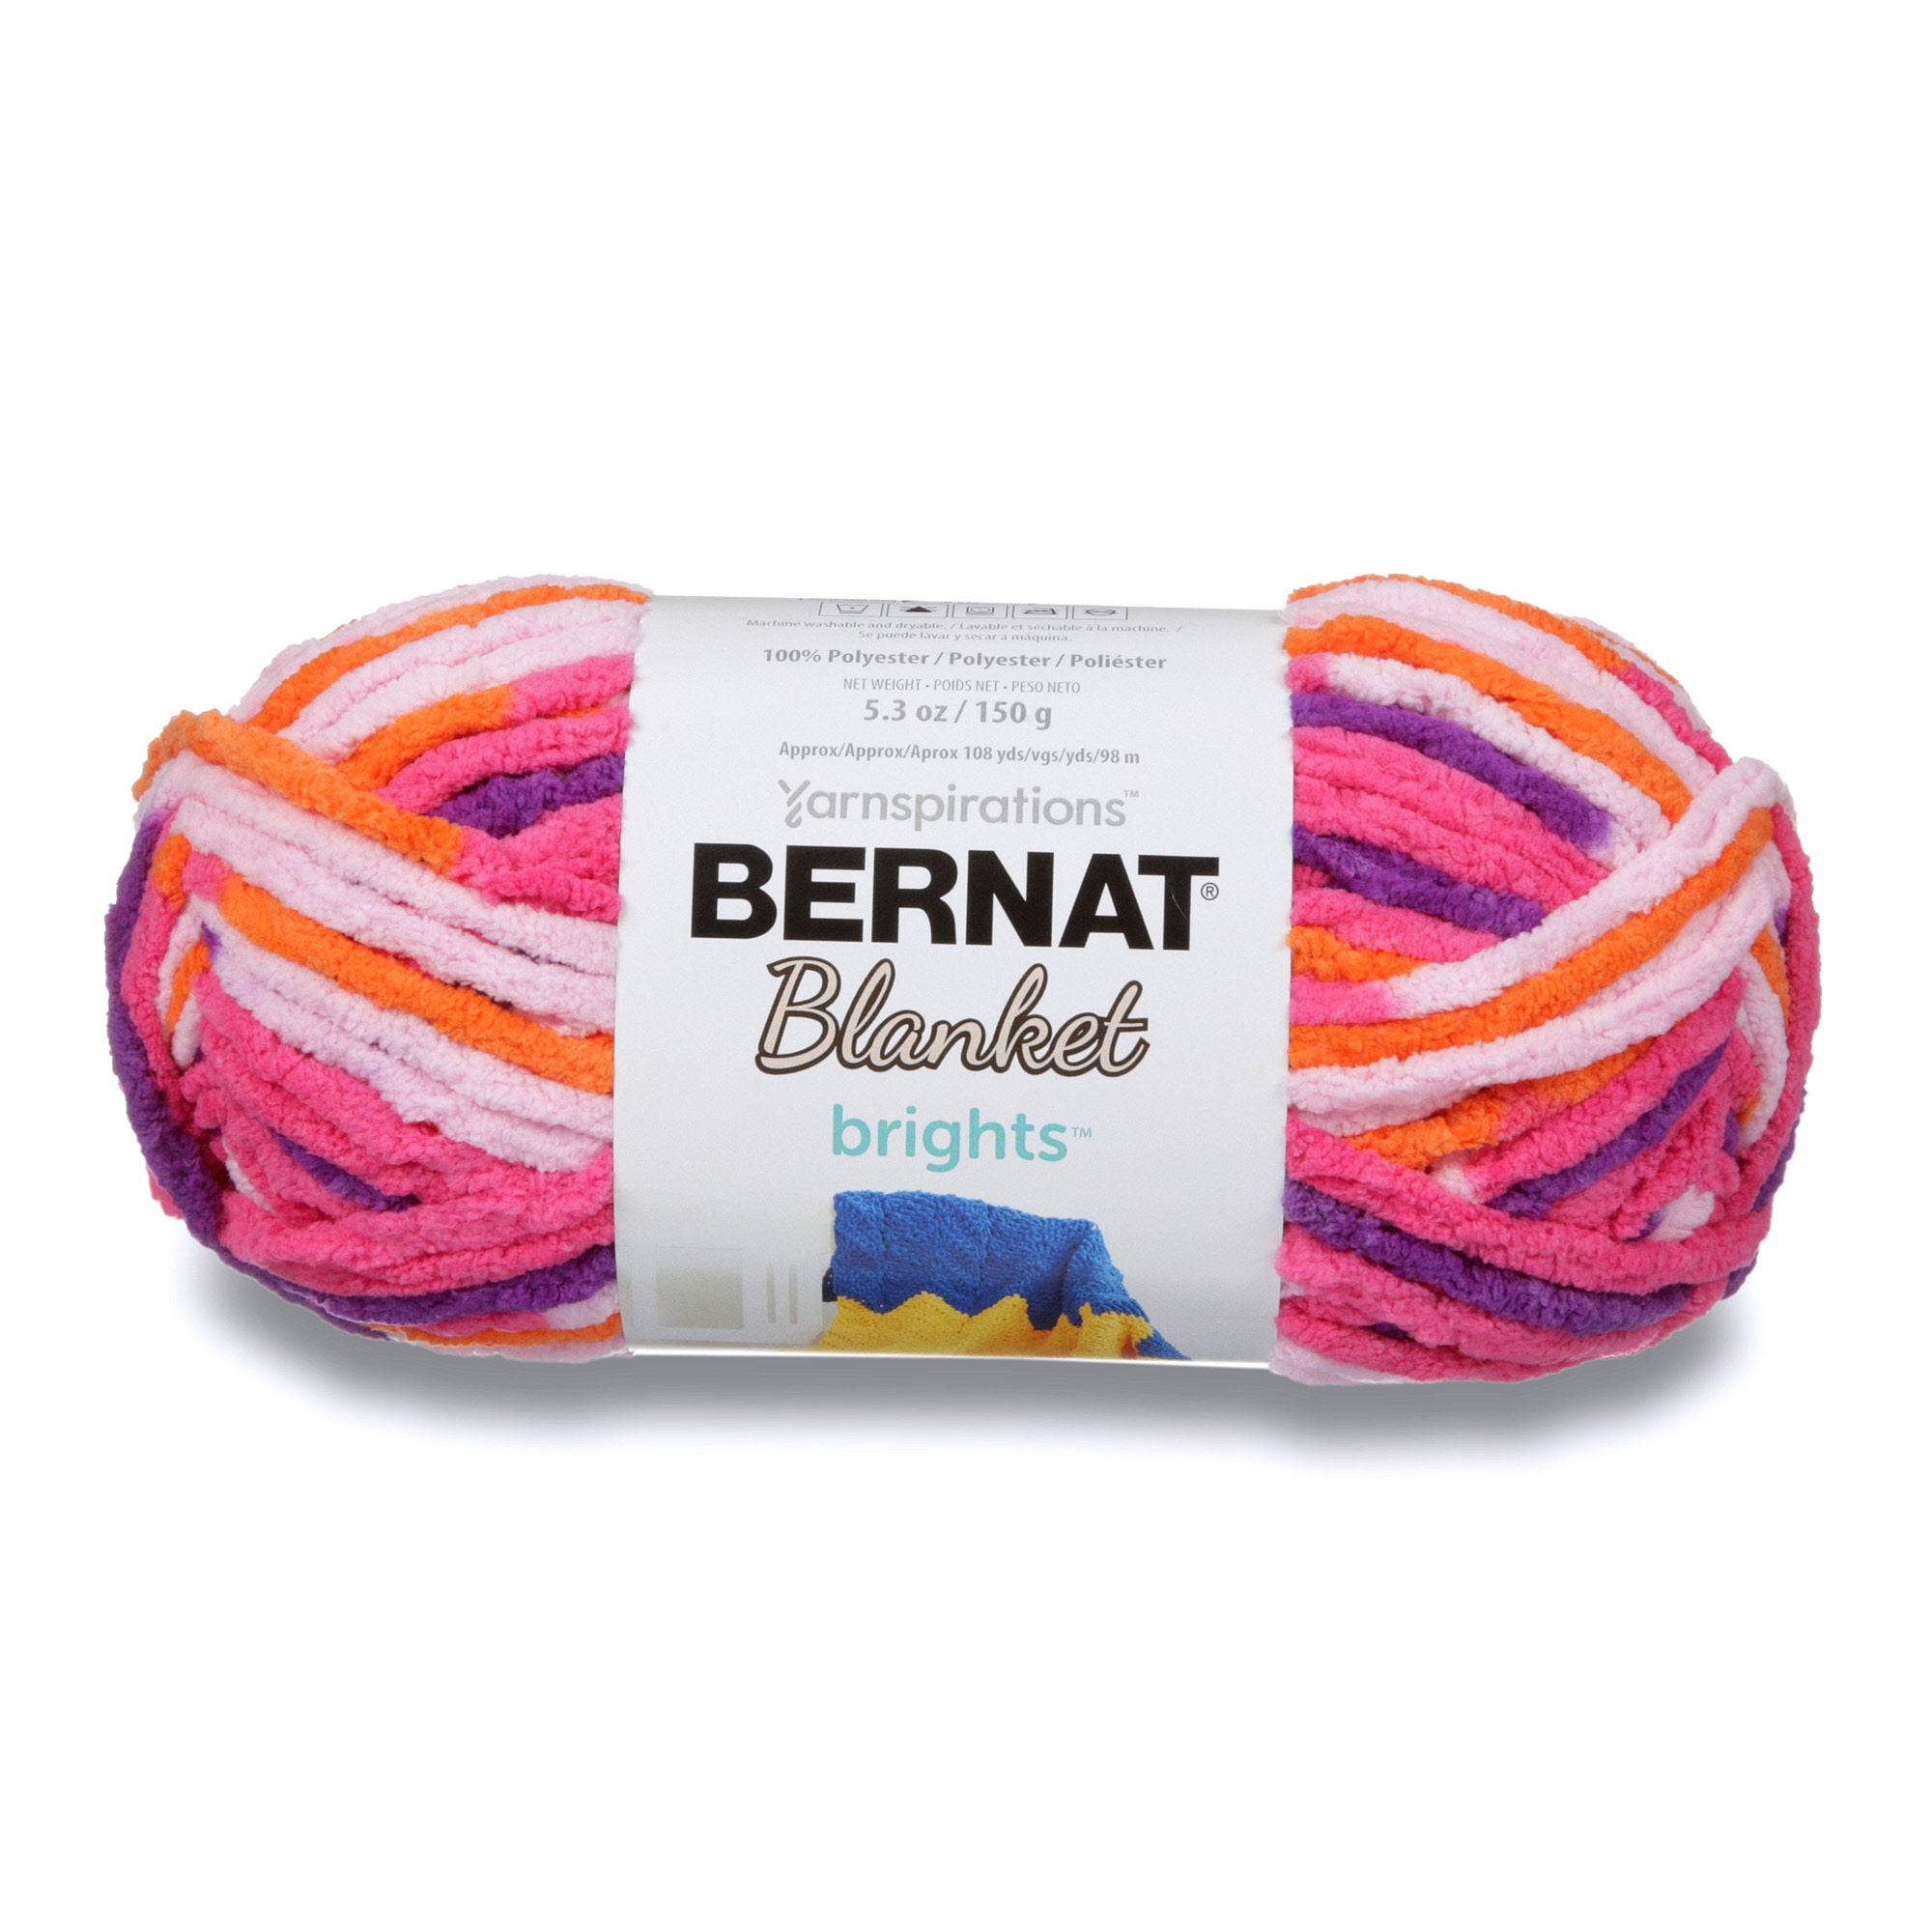 Bernat Blanket Brights Big Ball Yarn-Red, White & Boom Variegated, 1 count  - Fry's Food Stores